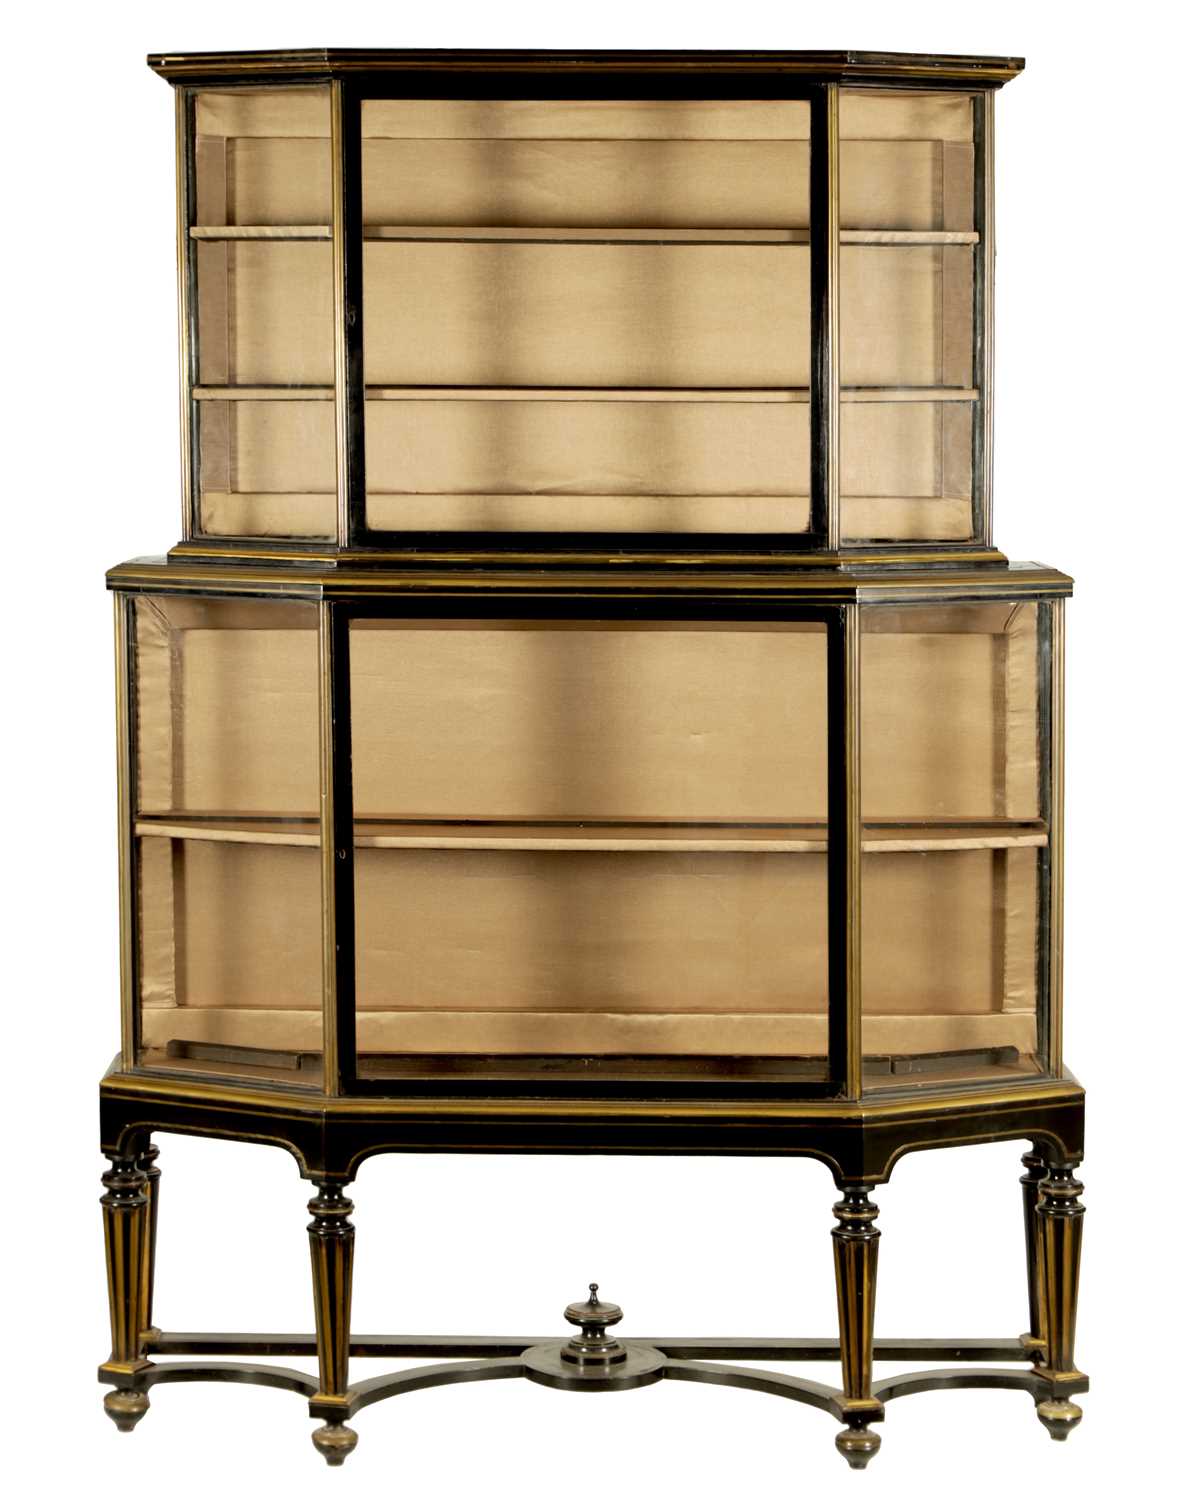 A 19TH CENTURY FRENCH EBONISED AND BRASS INLAID DISPLAY CABINET